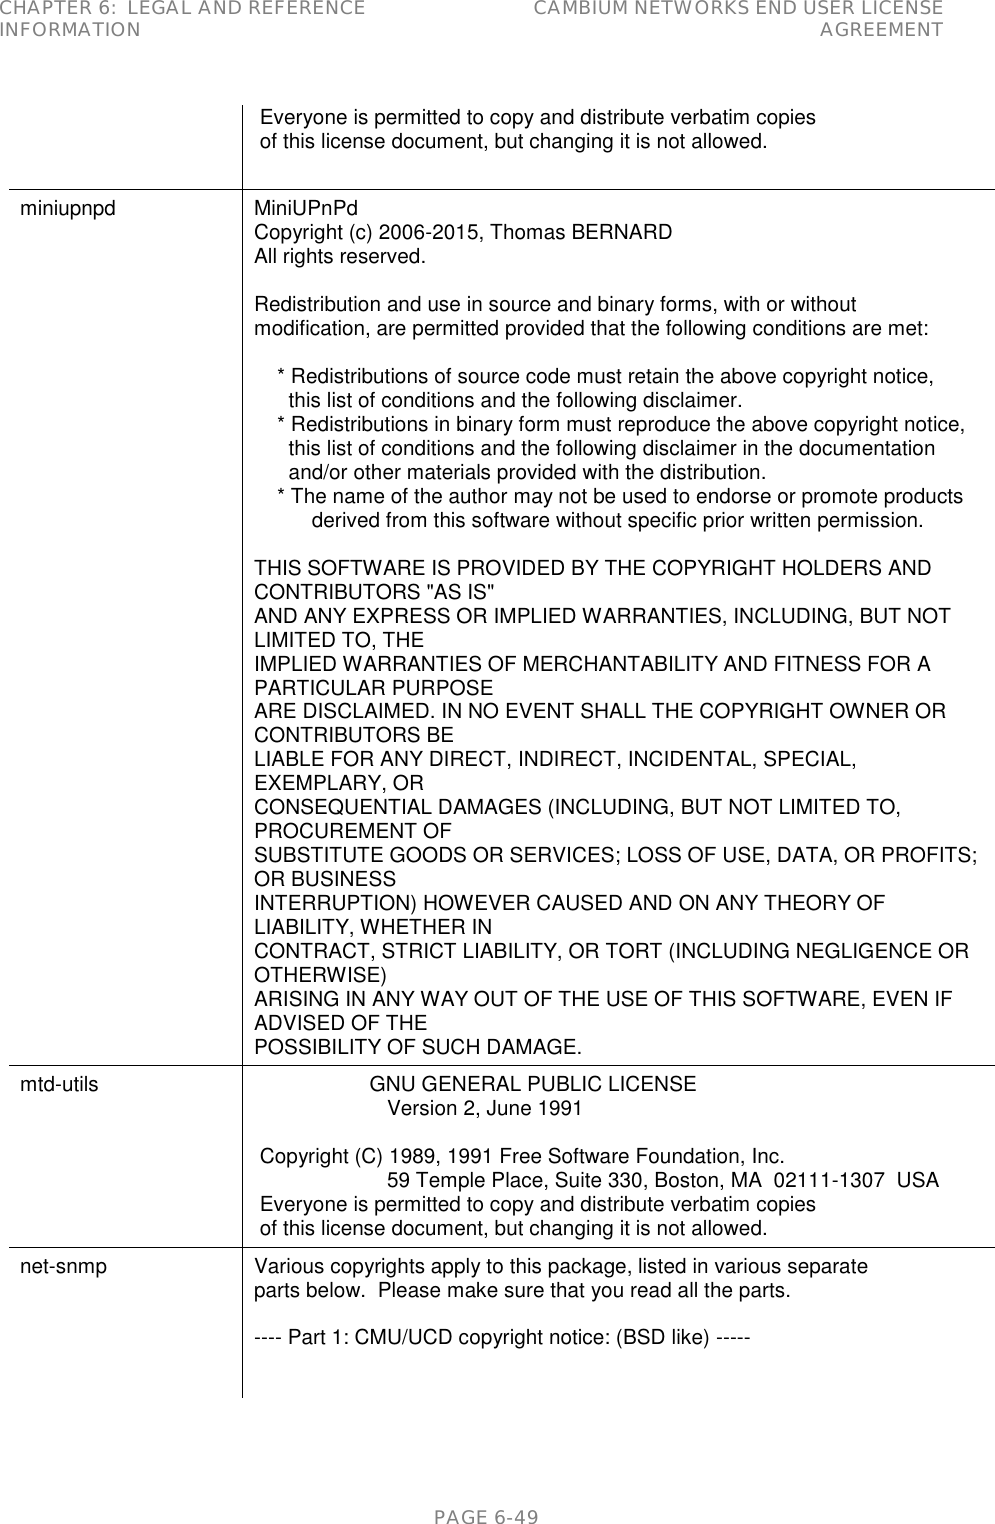 CHAPTER 6:  LEGAL AND REFERENCE INFORMATION CAMBIUM NETWORKS END USER LICENSE AGREEMENT   PAGE 6-49  Everyone is permitted to copy and distribute verbatim copies  of this license document, but changing it is not allowed. miniupnpd MiniUPnPd Copyright (c) 2006-2015, Thomas BERNARD All rights reserved.  Redistribution and use in source and binary forms, with or without modification, are permitted provided that the following conditions are met:      * Redistributions of source code must retain the above copyright notice,       this list of conditions and the following disclaimer.     * Redistributions in binary form must reproduce the above copyright notice,       this list of conditions and the following disclaimer in the documentation       and/or other materials provided with the distribution.     * The name of the author may not be used to endorse or promote products           derived from this software without specific prior written permission.  THIS SOFTWARE IS PROVIDED BY THE COPYRIGHT HOLDERS AND CONTRIBUTORS &quot;AS IS&quot; AND ANY EXPRESS OR IMPLIED WARRANTIES, INCLUDING, BUT NOT LIMITED TO, THE IMPLIED WARRANTIES OF MERCHANTABILITY AND FITNESS FOR A PARTICULAR PURPOSE ARE DISCLAIMED. IN NO EVENT SHALL THE COPYRIGHT OWNER OR CONTRIBUTORS BE LIABLE FOR ANY DIRECT, INDIRECT, INCIDENTAL, SPECIAL, EXEMPLARY, OR CONSEQUENTIAL DAMAGES (INCLUDING, BUT NOT LIMITED TO, PROCUREMENT OF SUBSTITUTE GOODS OR SERVICES; LOSS OF USE, DATA, OR PROFITS; OR BUSINESS INTERRUPTION) HOWEVER CAUSED AND ON ANY THEORY OF LIABILITY, WHETHER IN CONTRACT, STRICT LIABILITY, OR TORT (INCLUDING NEGLIGENCE OR OTHERWISE) ARISING IN ANY WAY OUT OF THE USE OF THIS SOFTWARE, EVEN IF ADVISED OF THE POSSIBILITY OF SUCH DAMAGE. mtd-utils                     GNU GENERAL PUBLIC LICENSE                        Version 2, June 1991   Copyright (C) 1989, 1991 Free Software Foundation, Inc.                        59 Temple Place, Suite 330, Boston, MA  02111-1307  USA  Everyone is permitted to copy and distribute verbatim copies  of this license document, but changing it is not allowed. net-snmp Various copyrights apply to this package, listed in various separate parts below.  Please make sure that you read all the parts.  ---- Part 1: CMU/UCD copyright notice: (BSD like) -----   